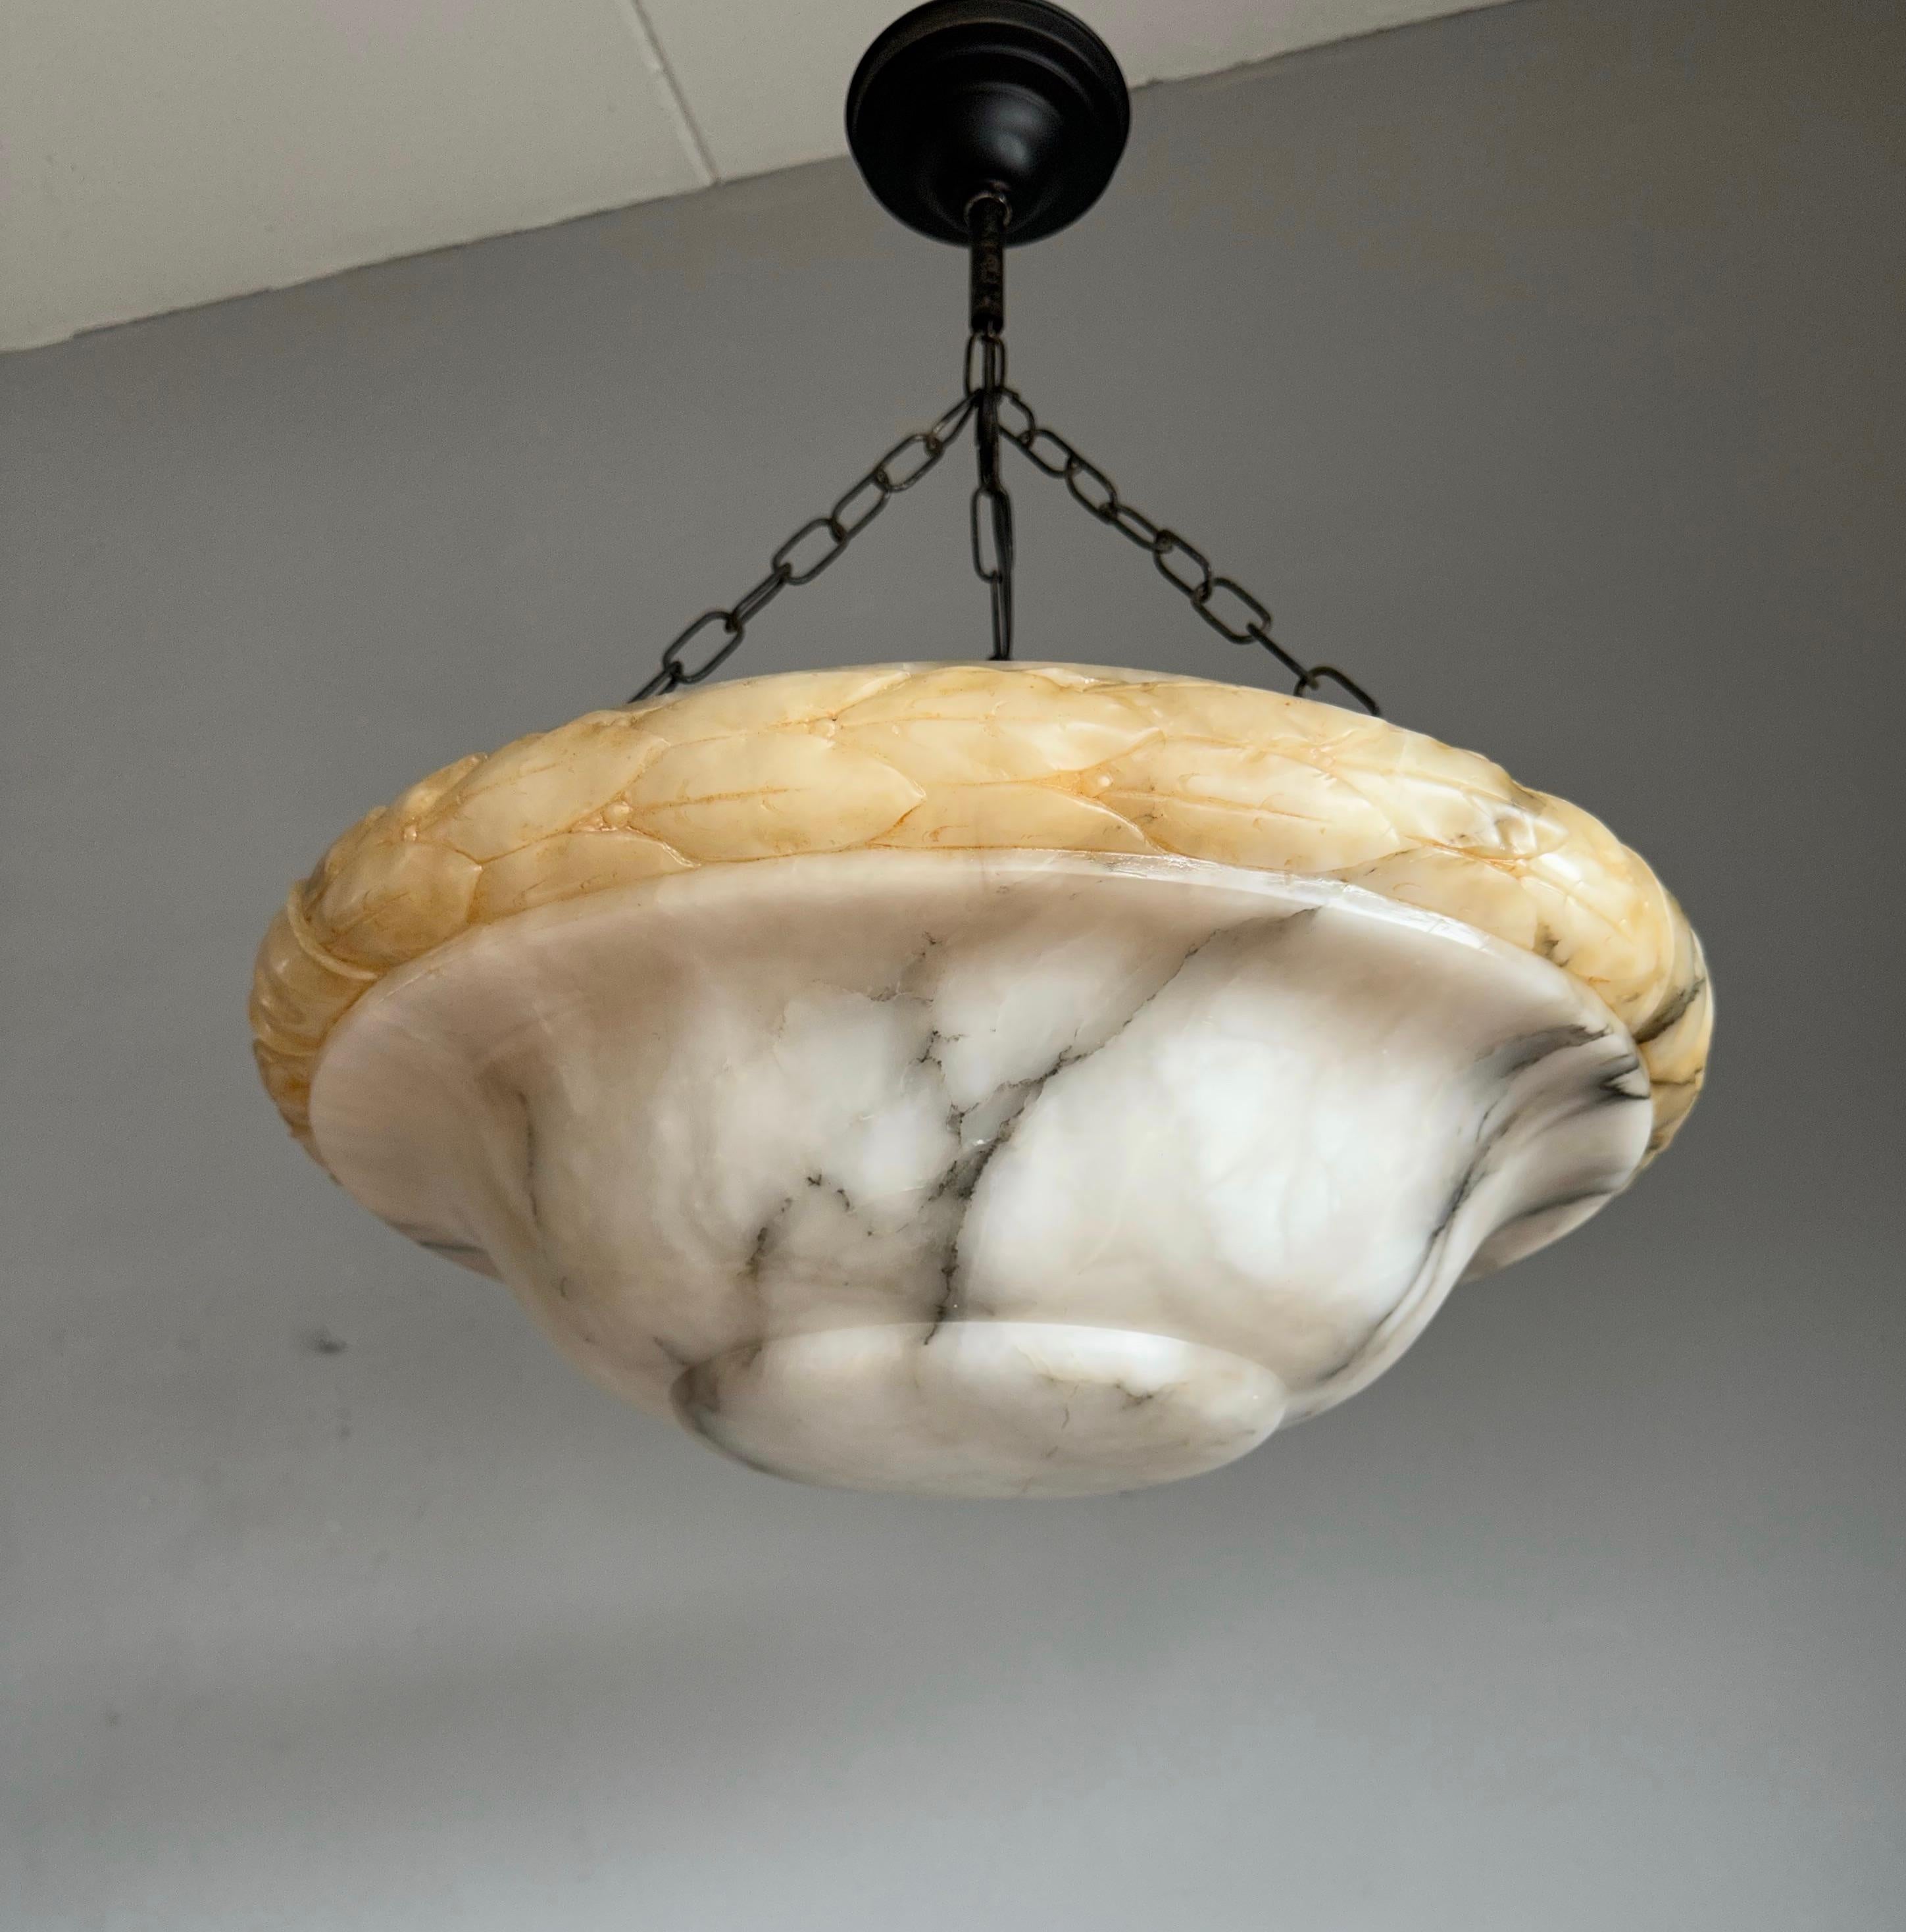 Top class Art Deco pendant with a hand carved alabaster dish shade with stunning black thunder stroke veins and leaf carvings.

Thanks to its large size and stylish design this triple light alabaster chandelier can be used and enjoyed in all kinds